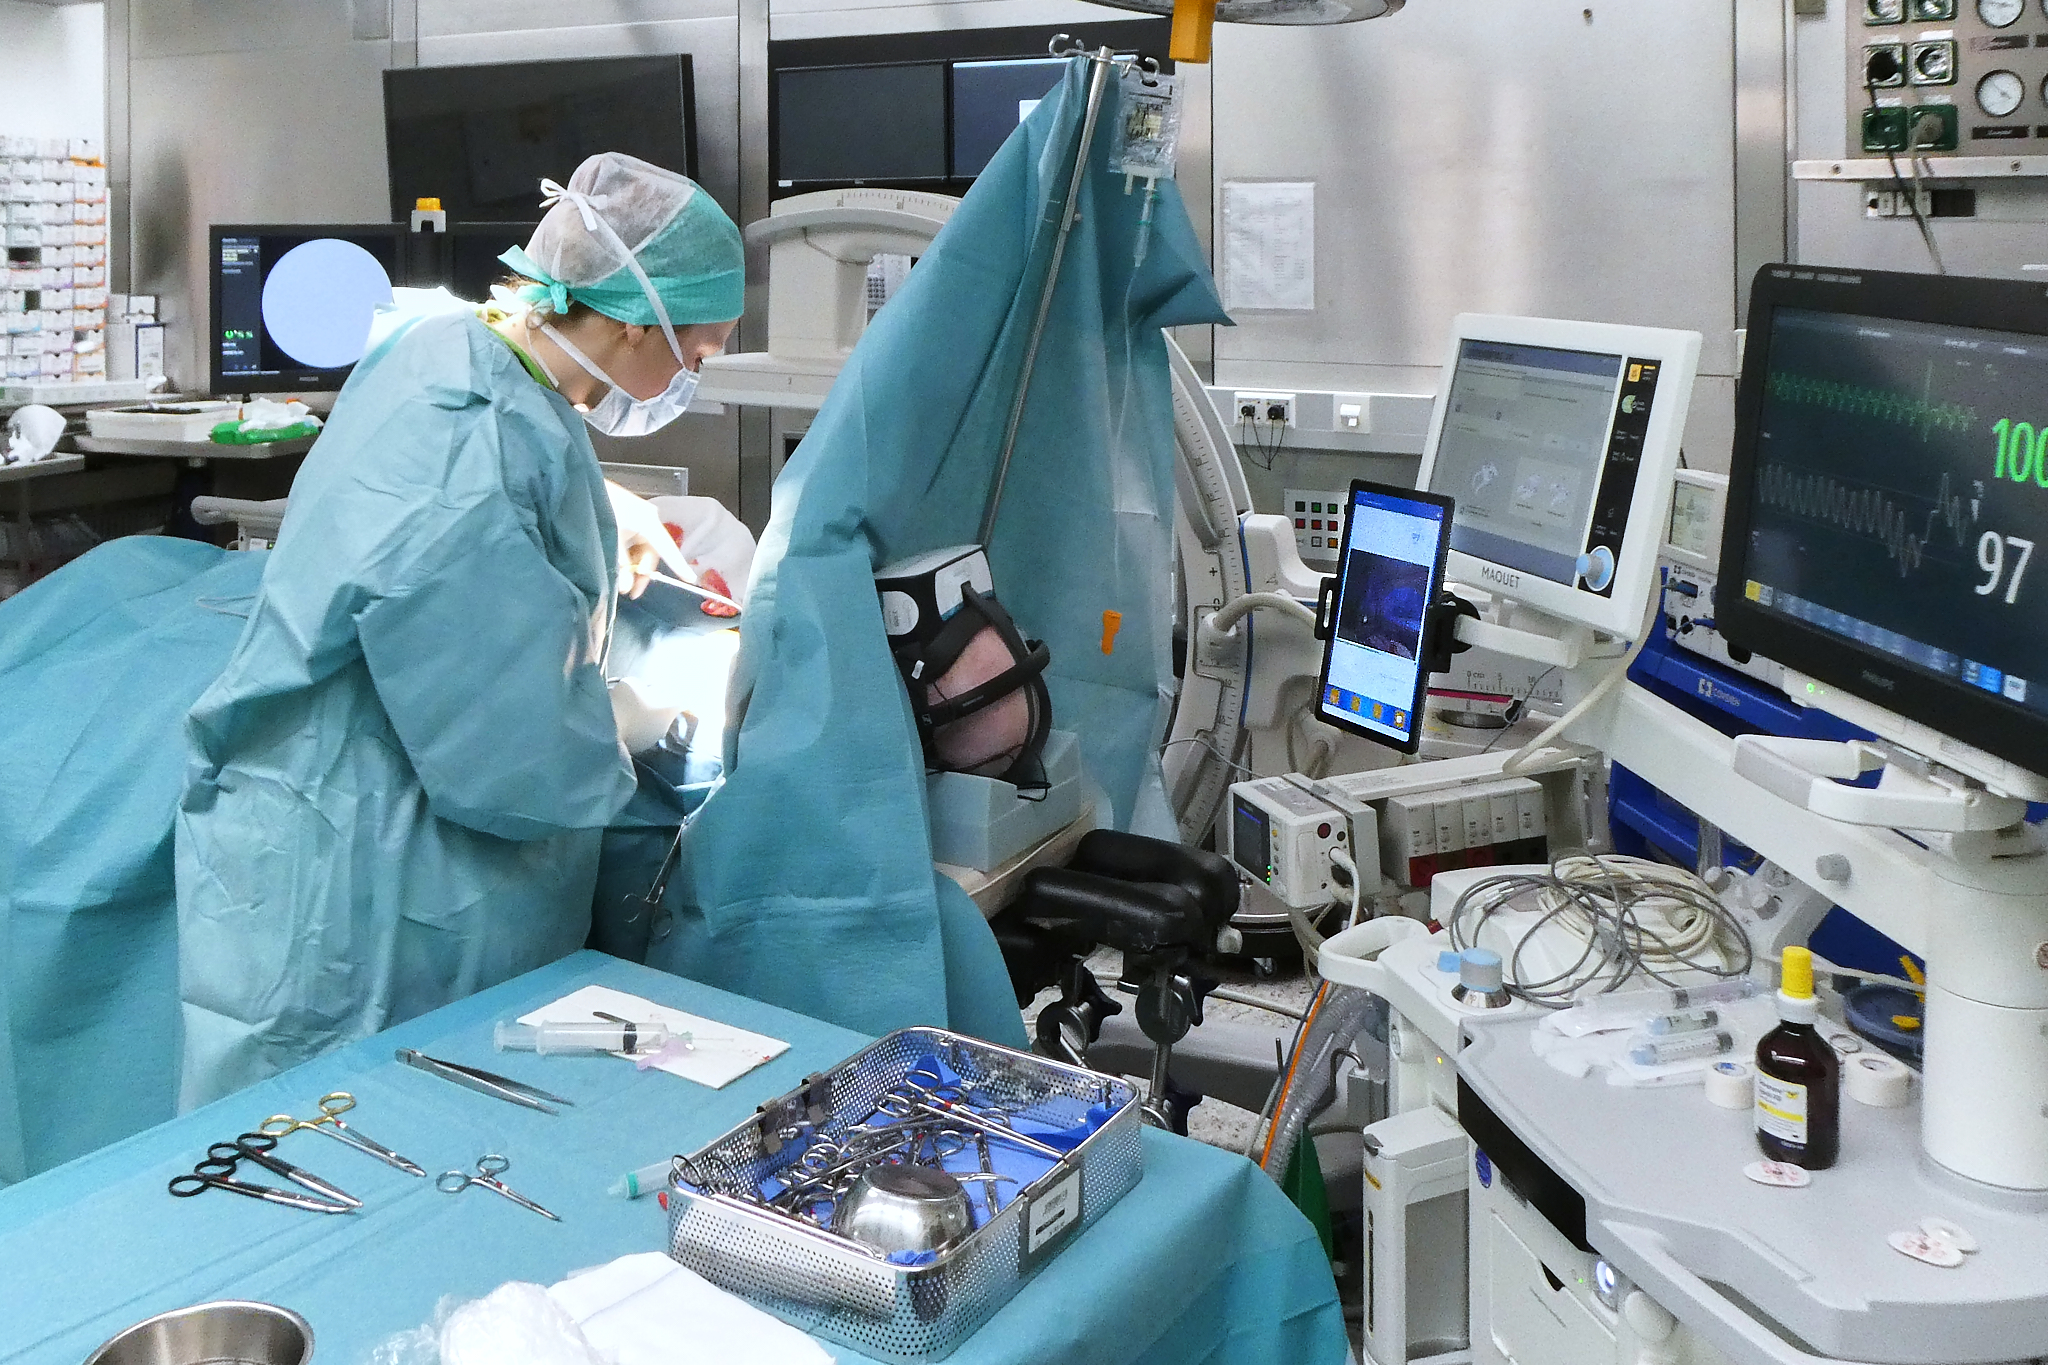 Oncology surgery on a patient with virtual reality glasses under Digital Sedation